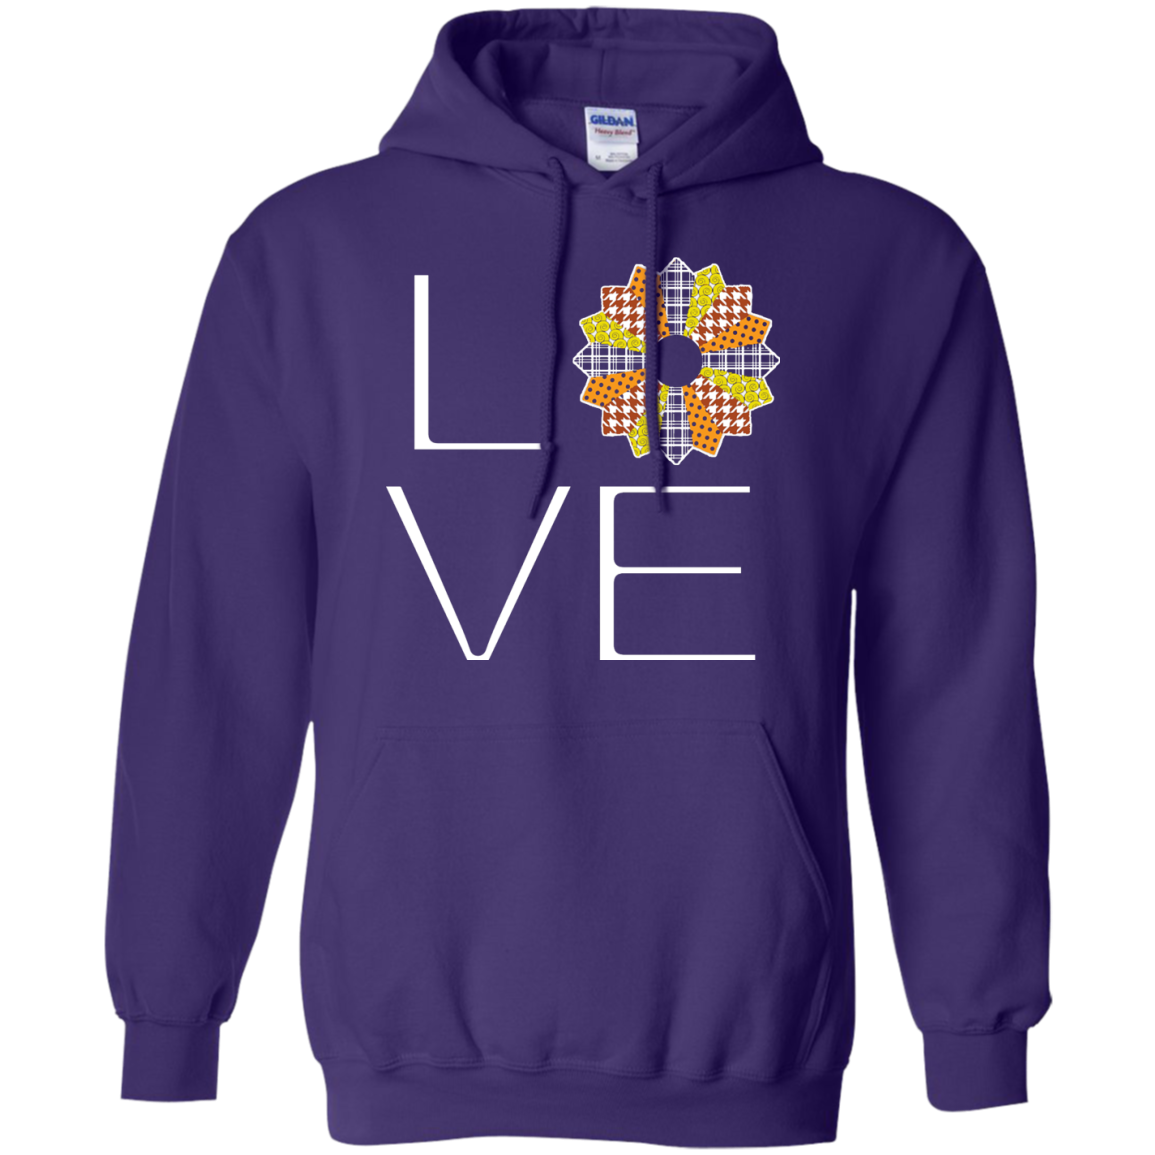 LOVE Quilting (Fall Colors) Pullover Hoodies - Crafter4Life - 4